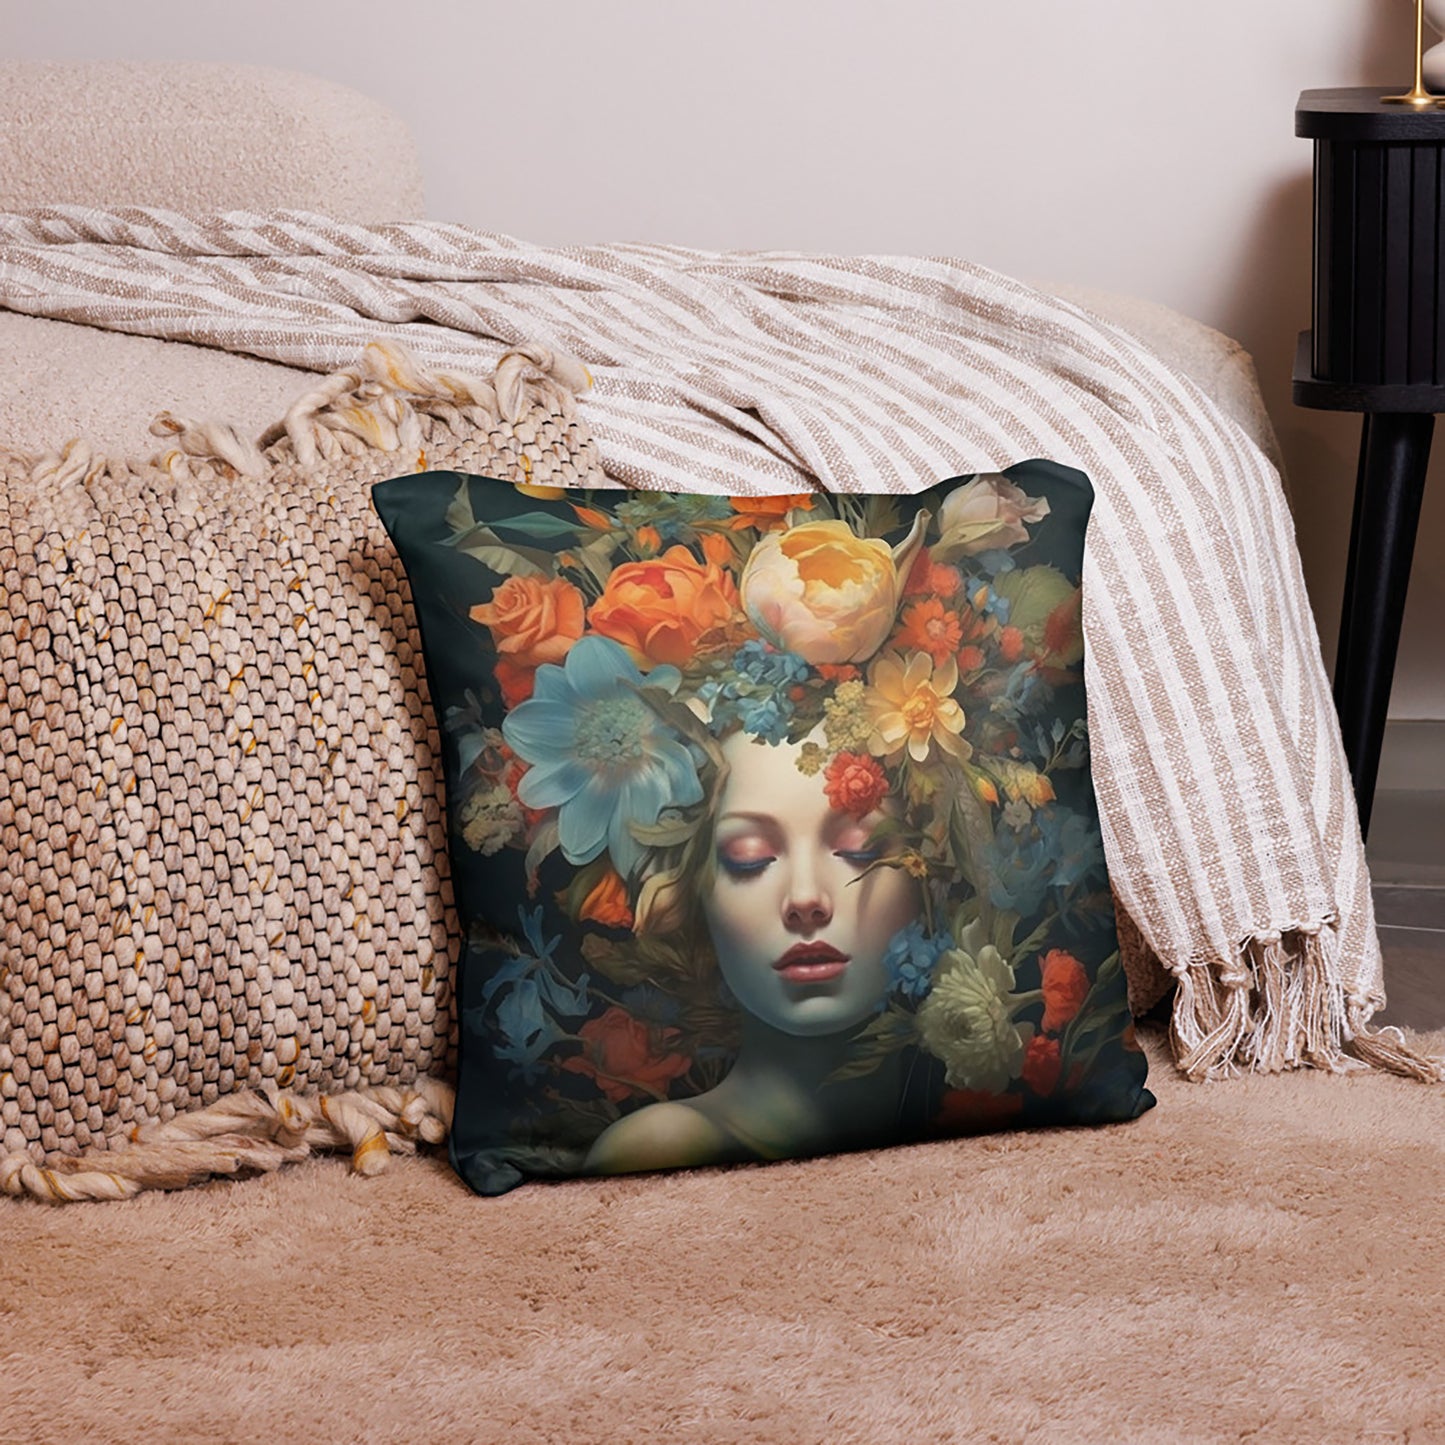 Floral Throw Pillow Female Muse Artistic Polyester Decorative Cushion 18x18